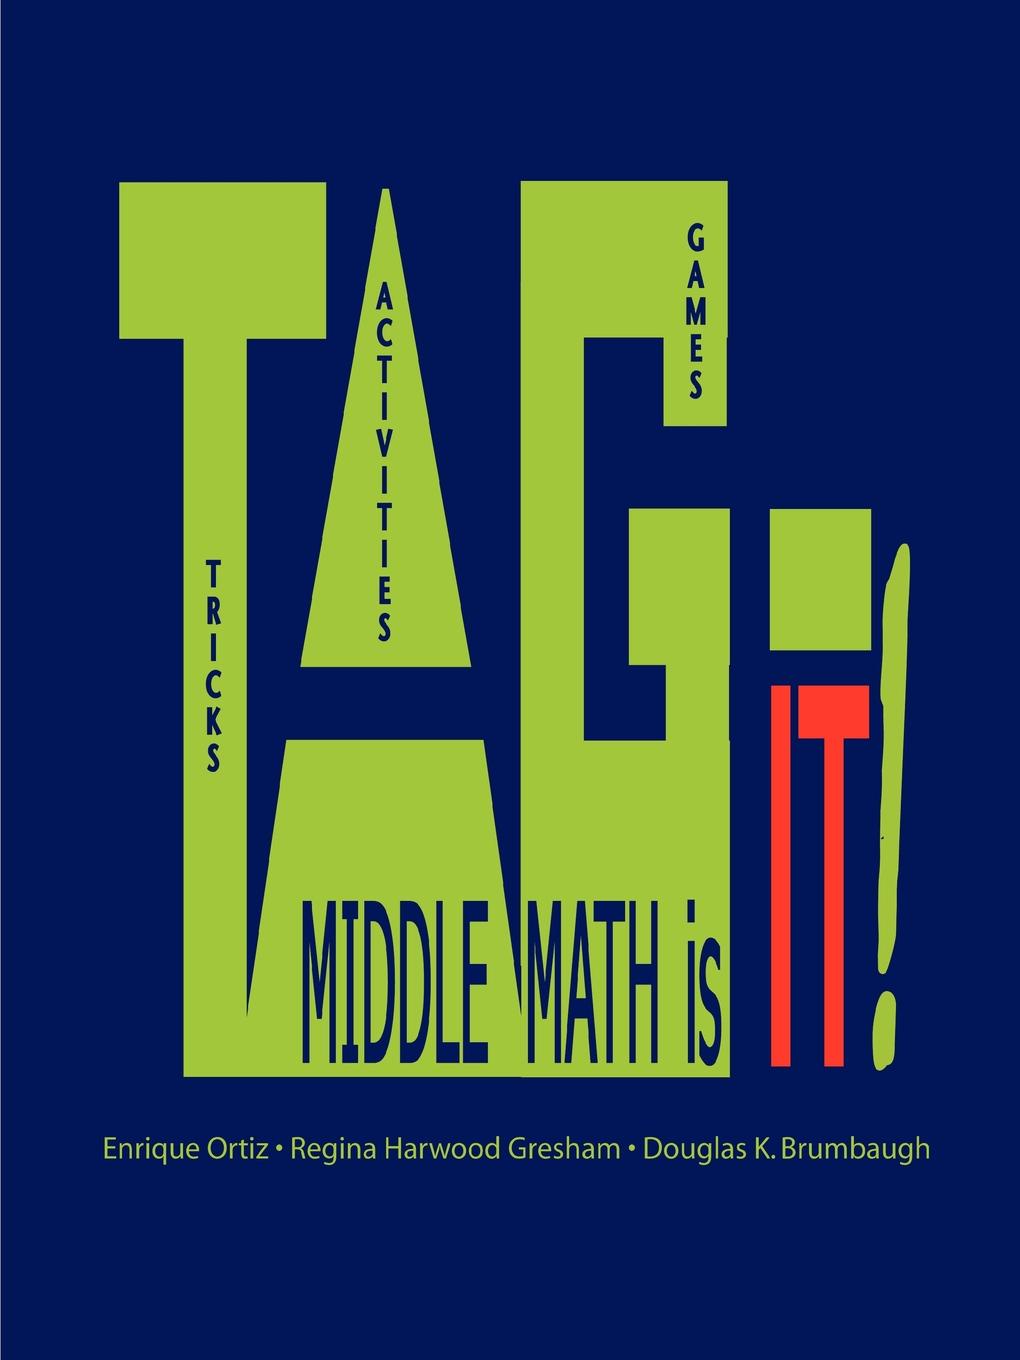 TAG - MIDDLE MATH is it.